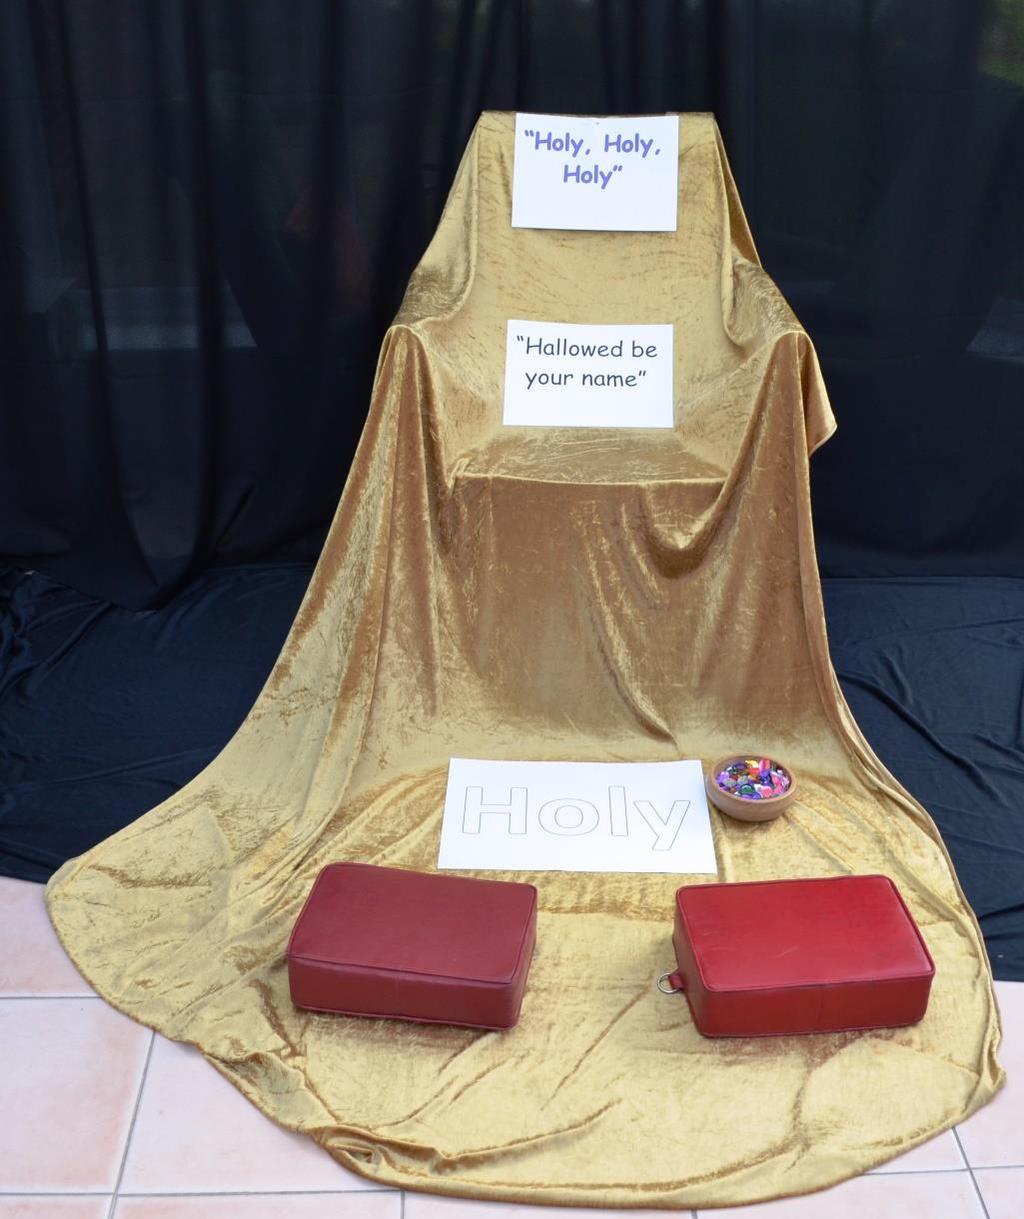 5 Station 2: Hallowed be your name Hallowed be thy name Items Needed: A chair covered with gold coloured material 3 that flows onto the floor in front of it, so that it looks like a throne.